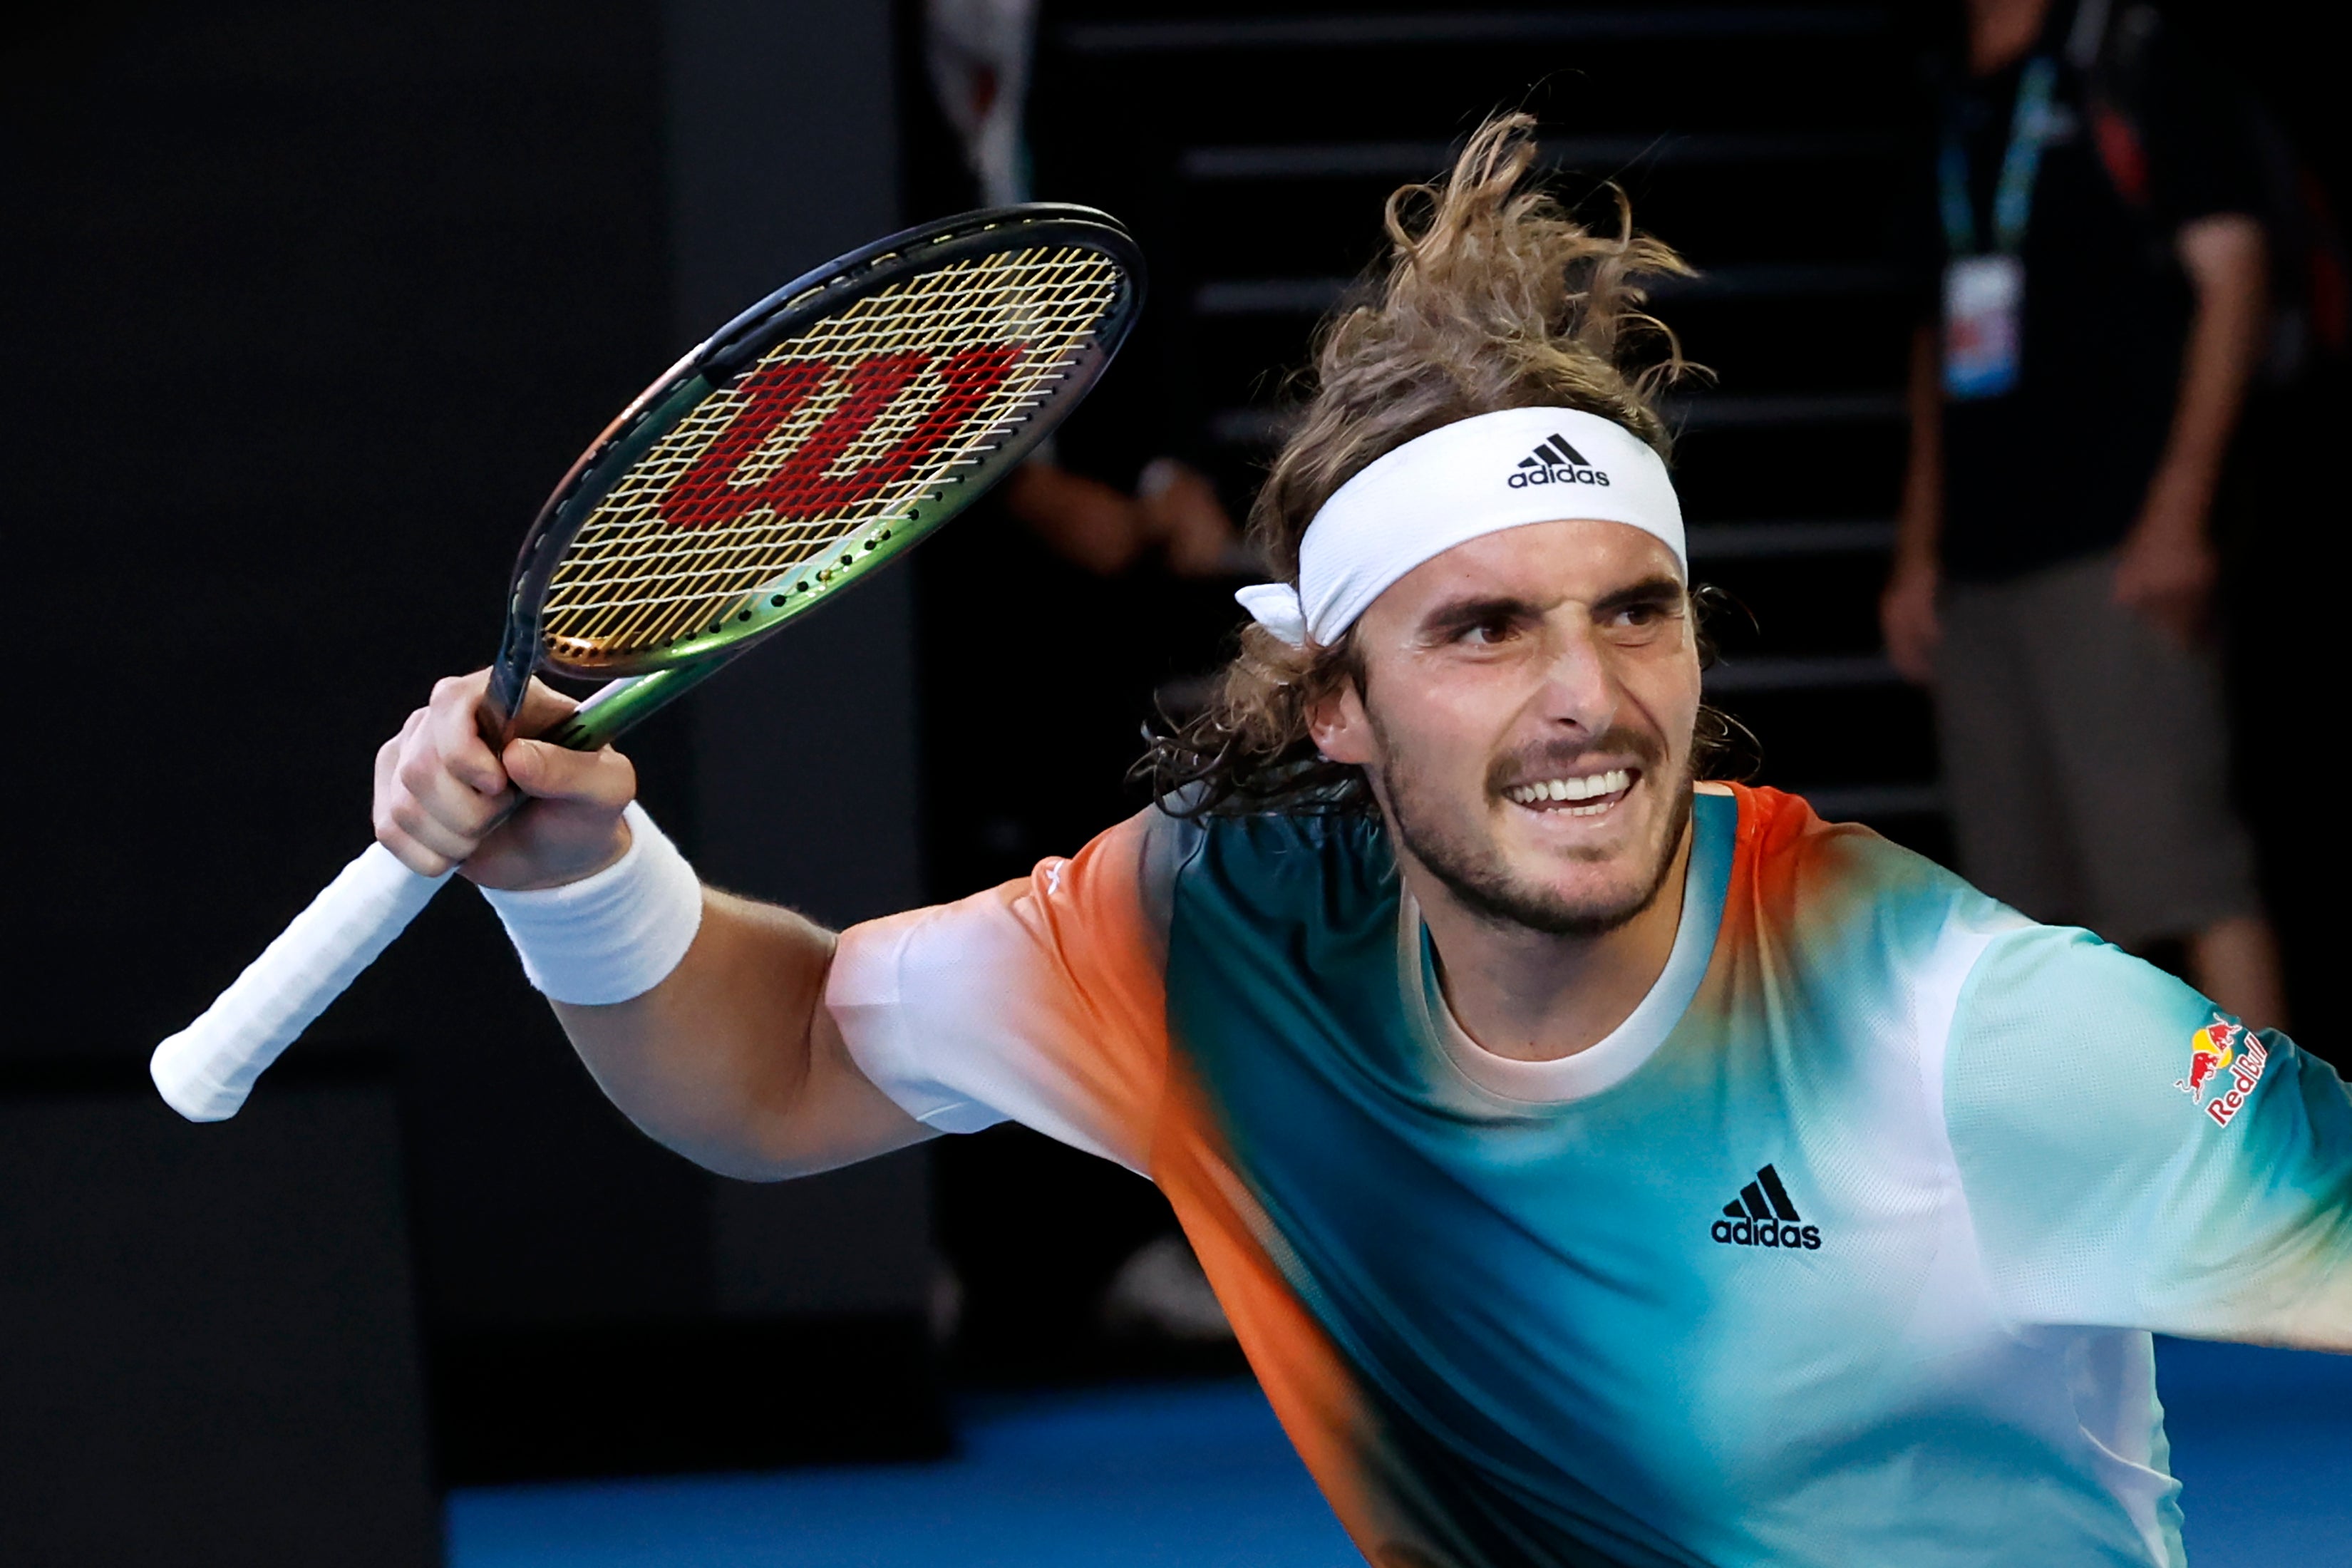 Stefanos Tsitsipas is looking to make it back into the last eight in Melbourne (Hamish Blair/AP)